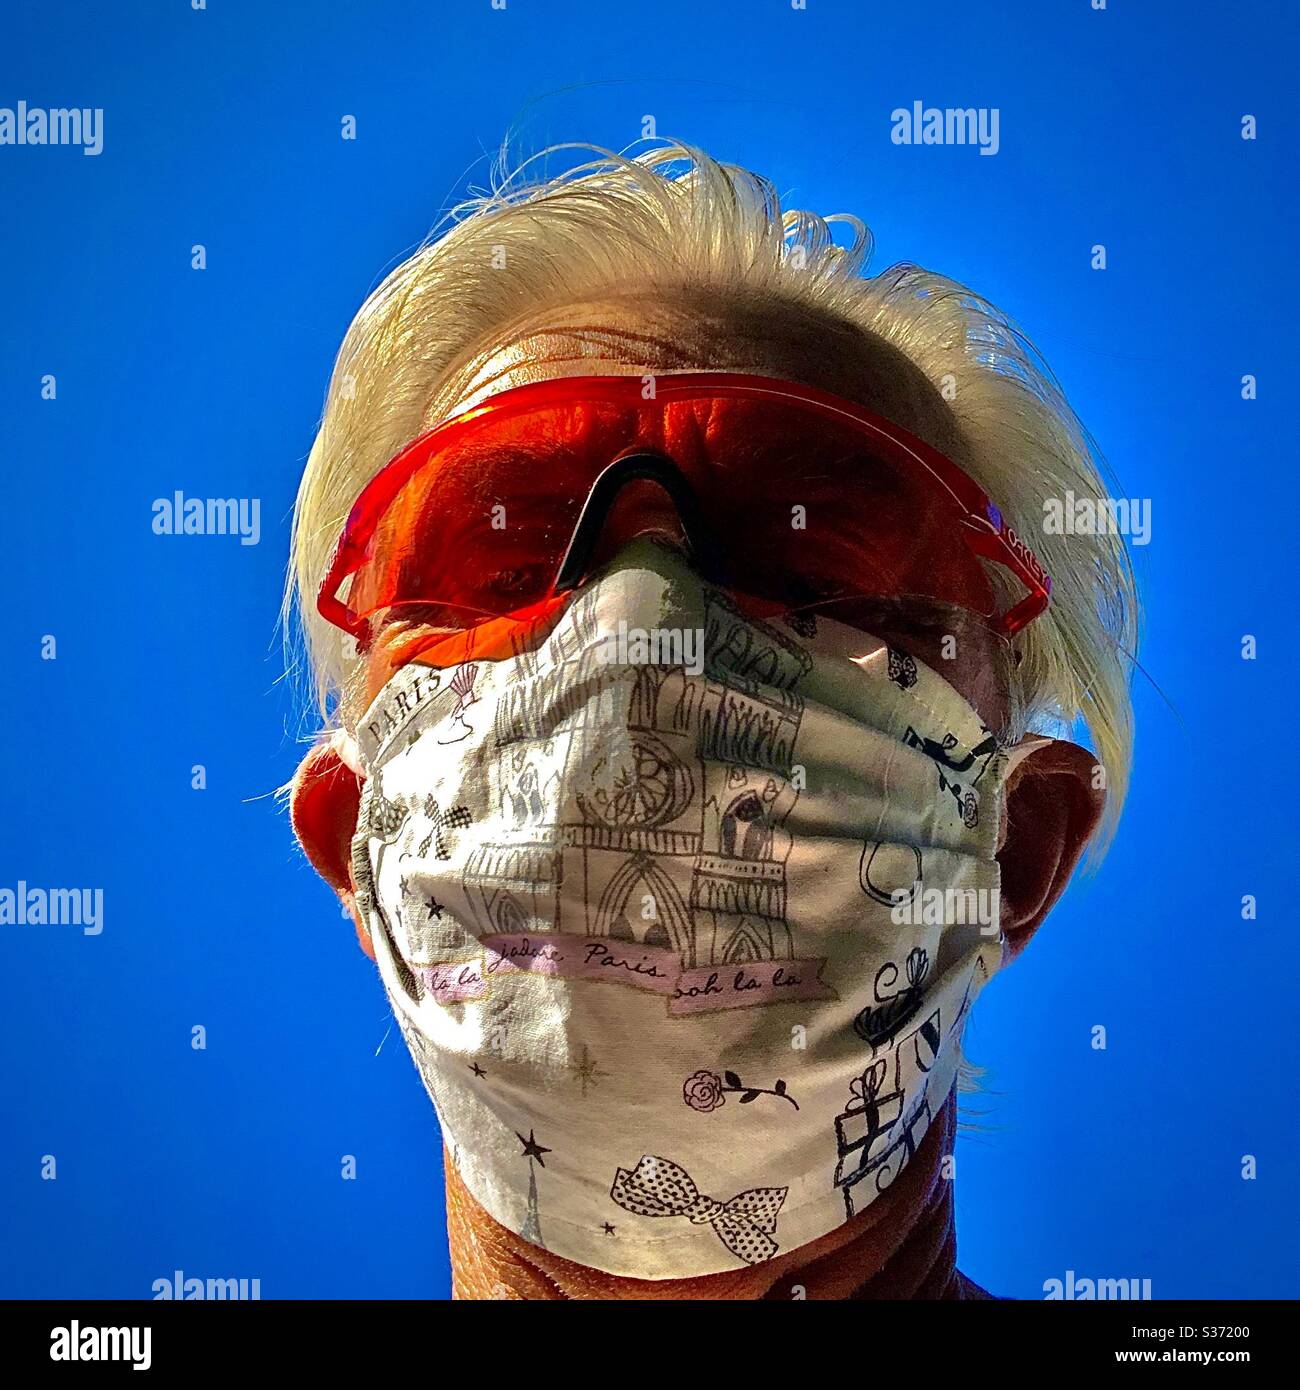 Selfie with Covid-19 face mask and goggles protection. Stock Photo